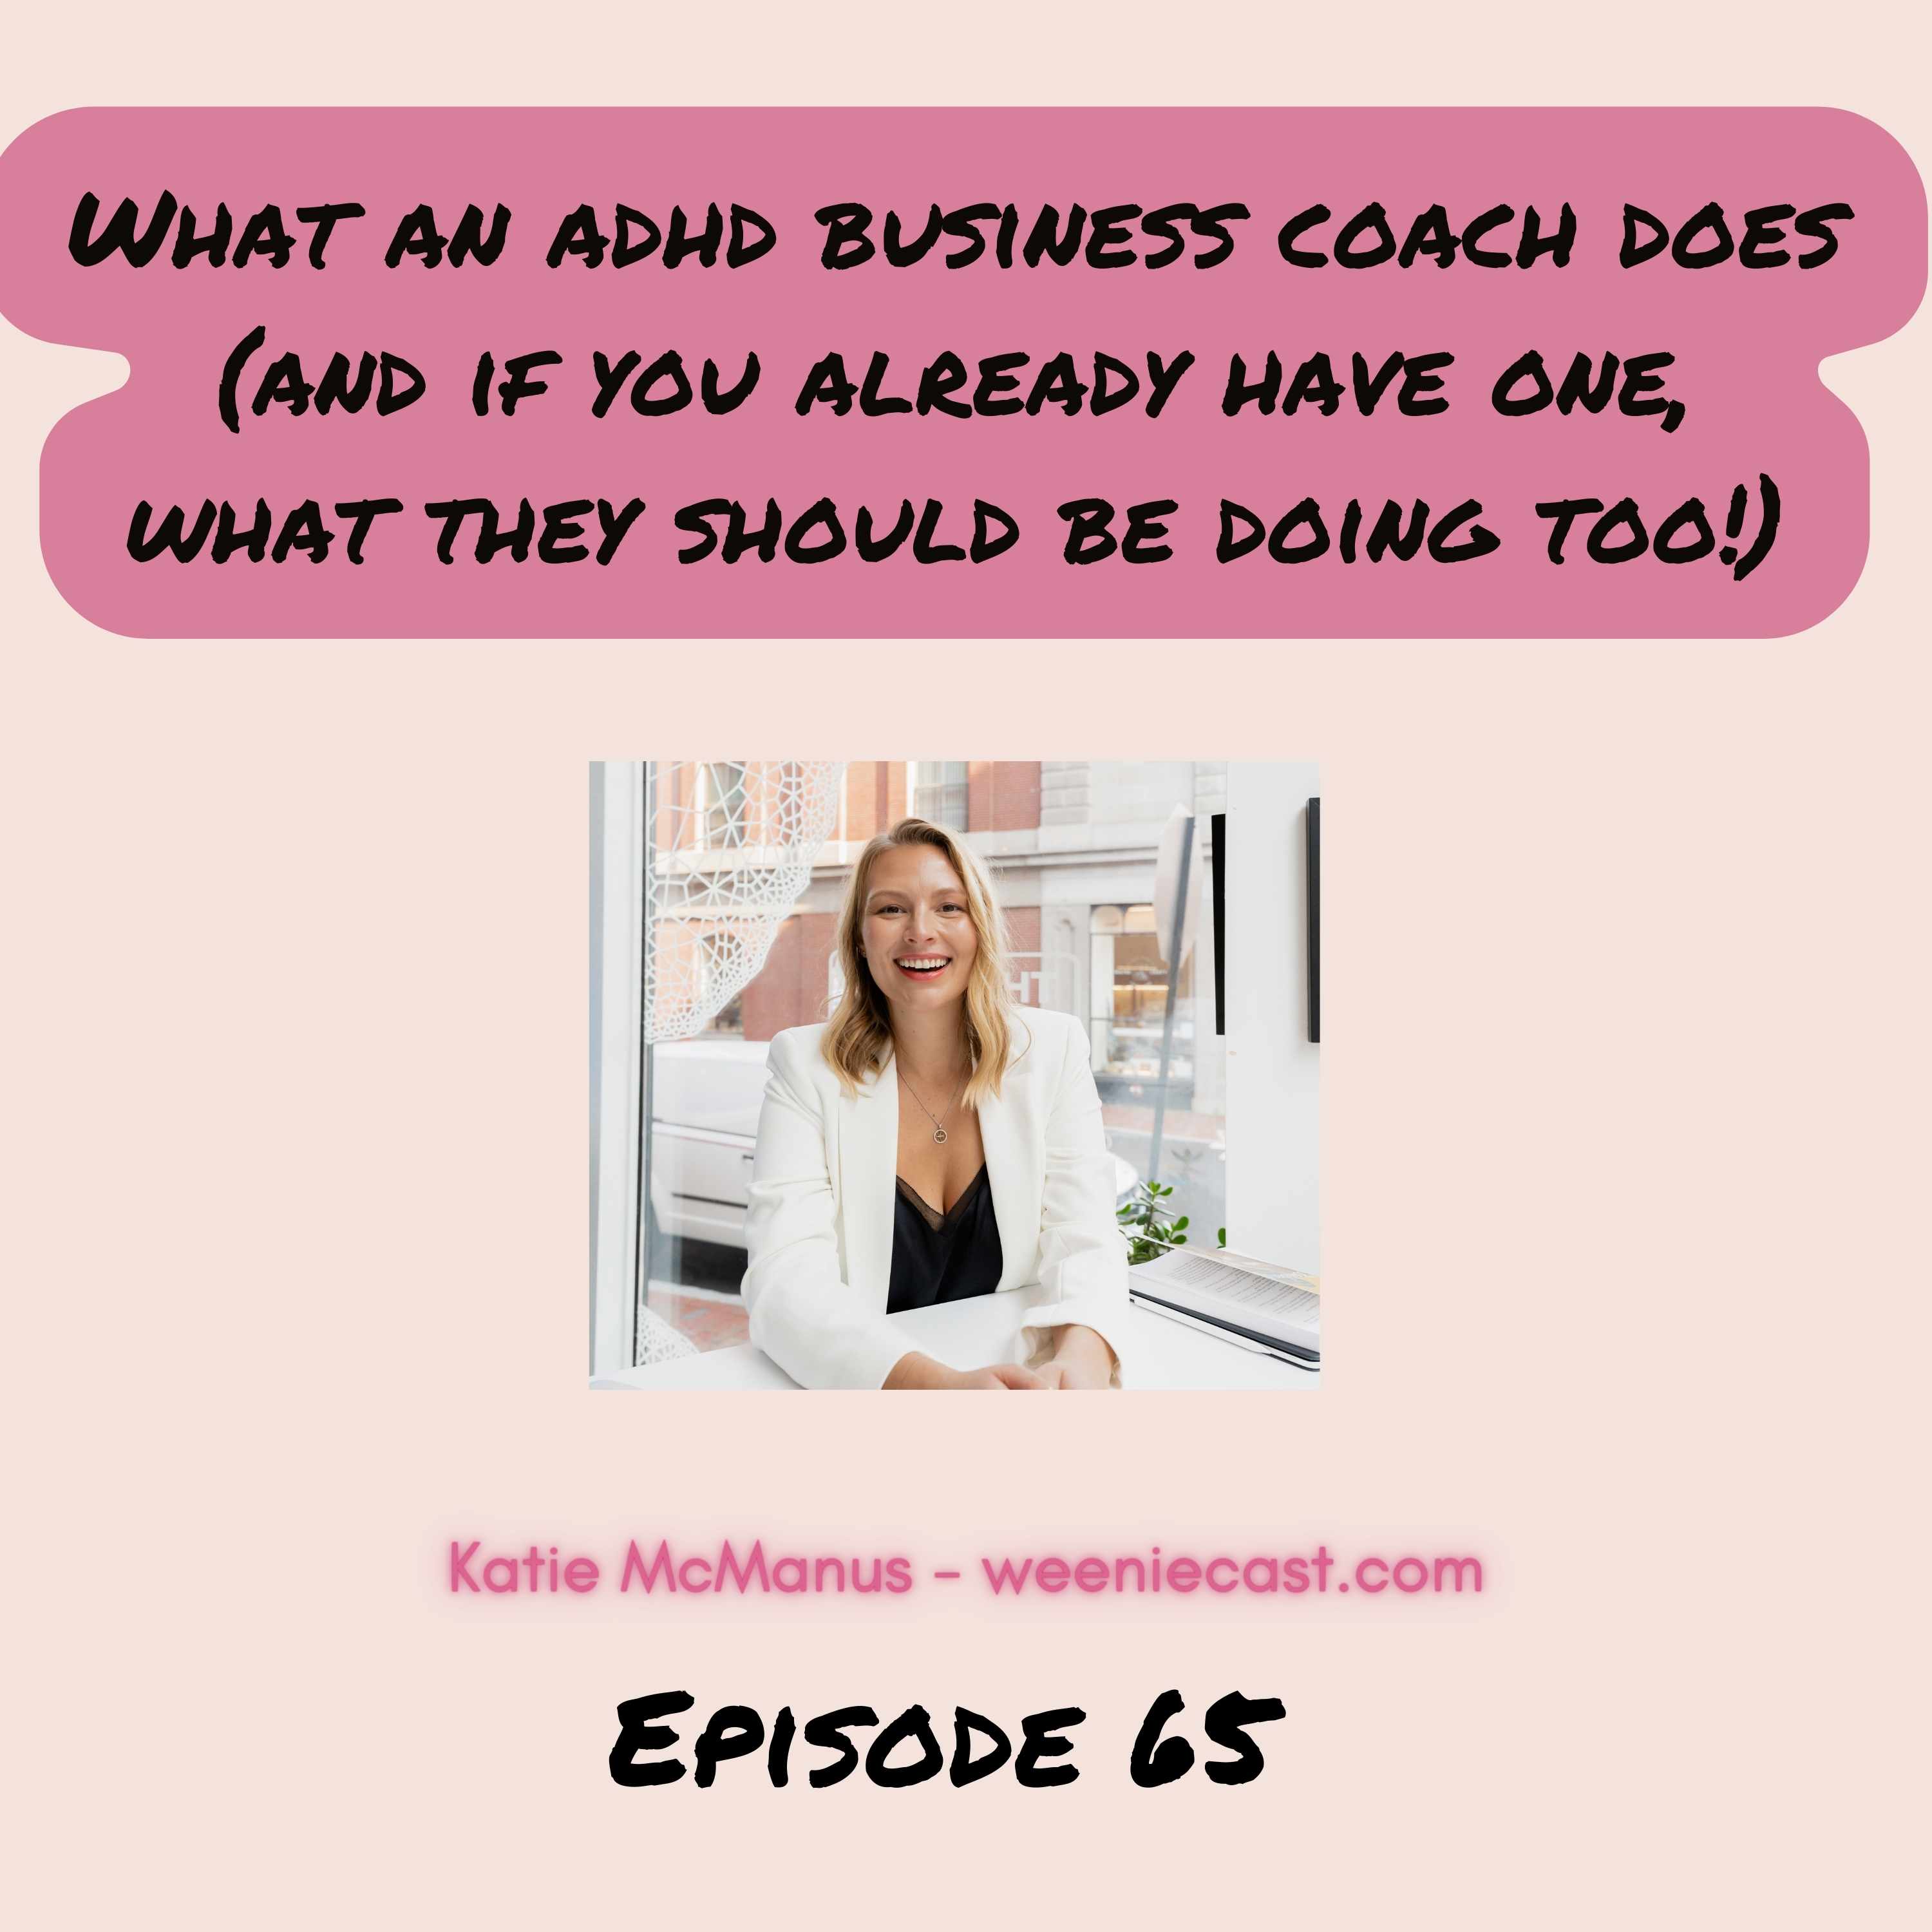 What does an ADHD business coach do to help entrepreneurs?